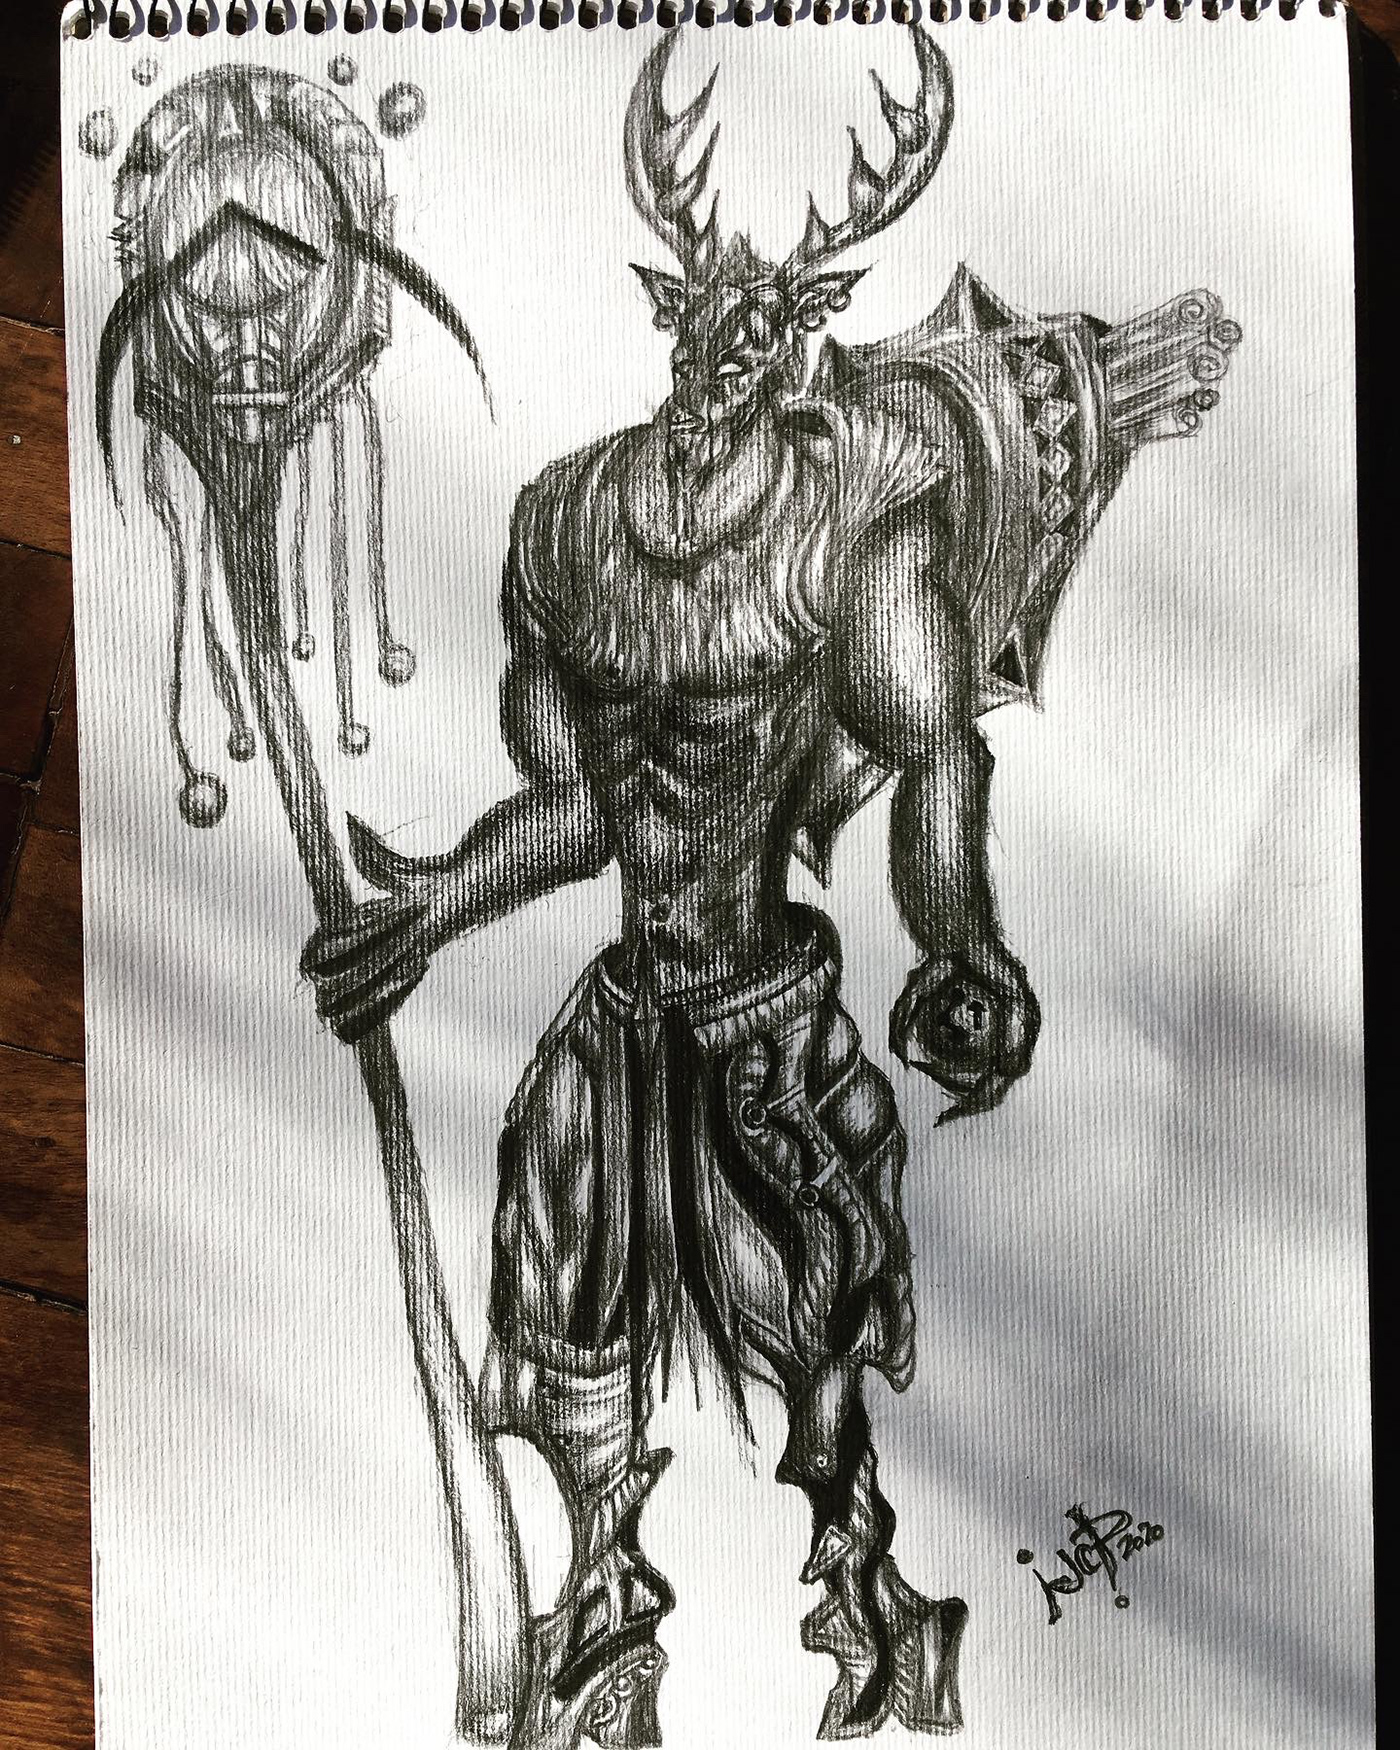 conceptart concept concept art fantasy Picture shaman gamedev gameart Game Development character concept fantasy artwork artwork game design  design artist Project new work New Picture artist artistic creative graphic work Pencil drawing Drawing  draw arte message